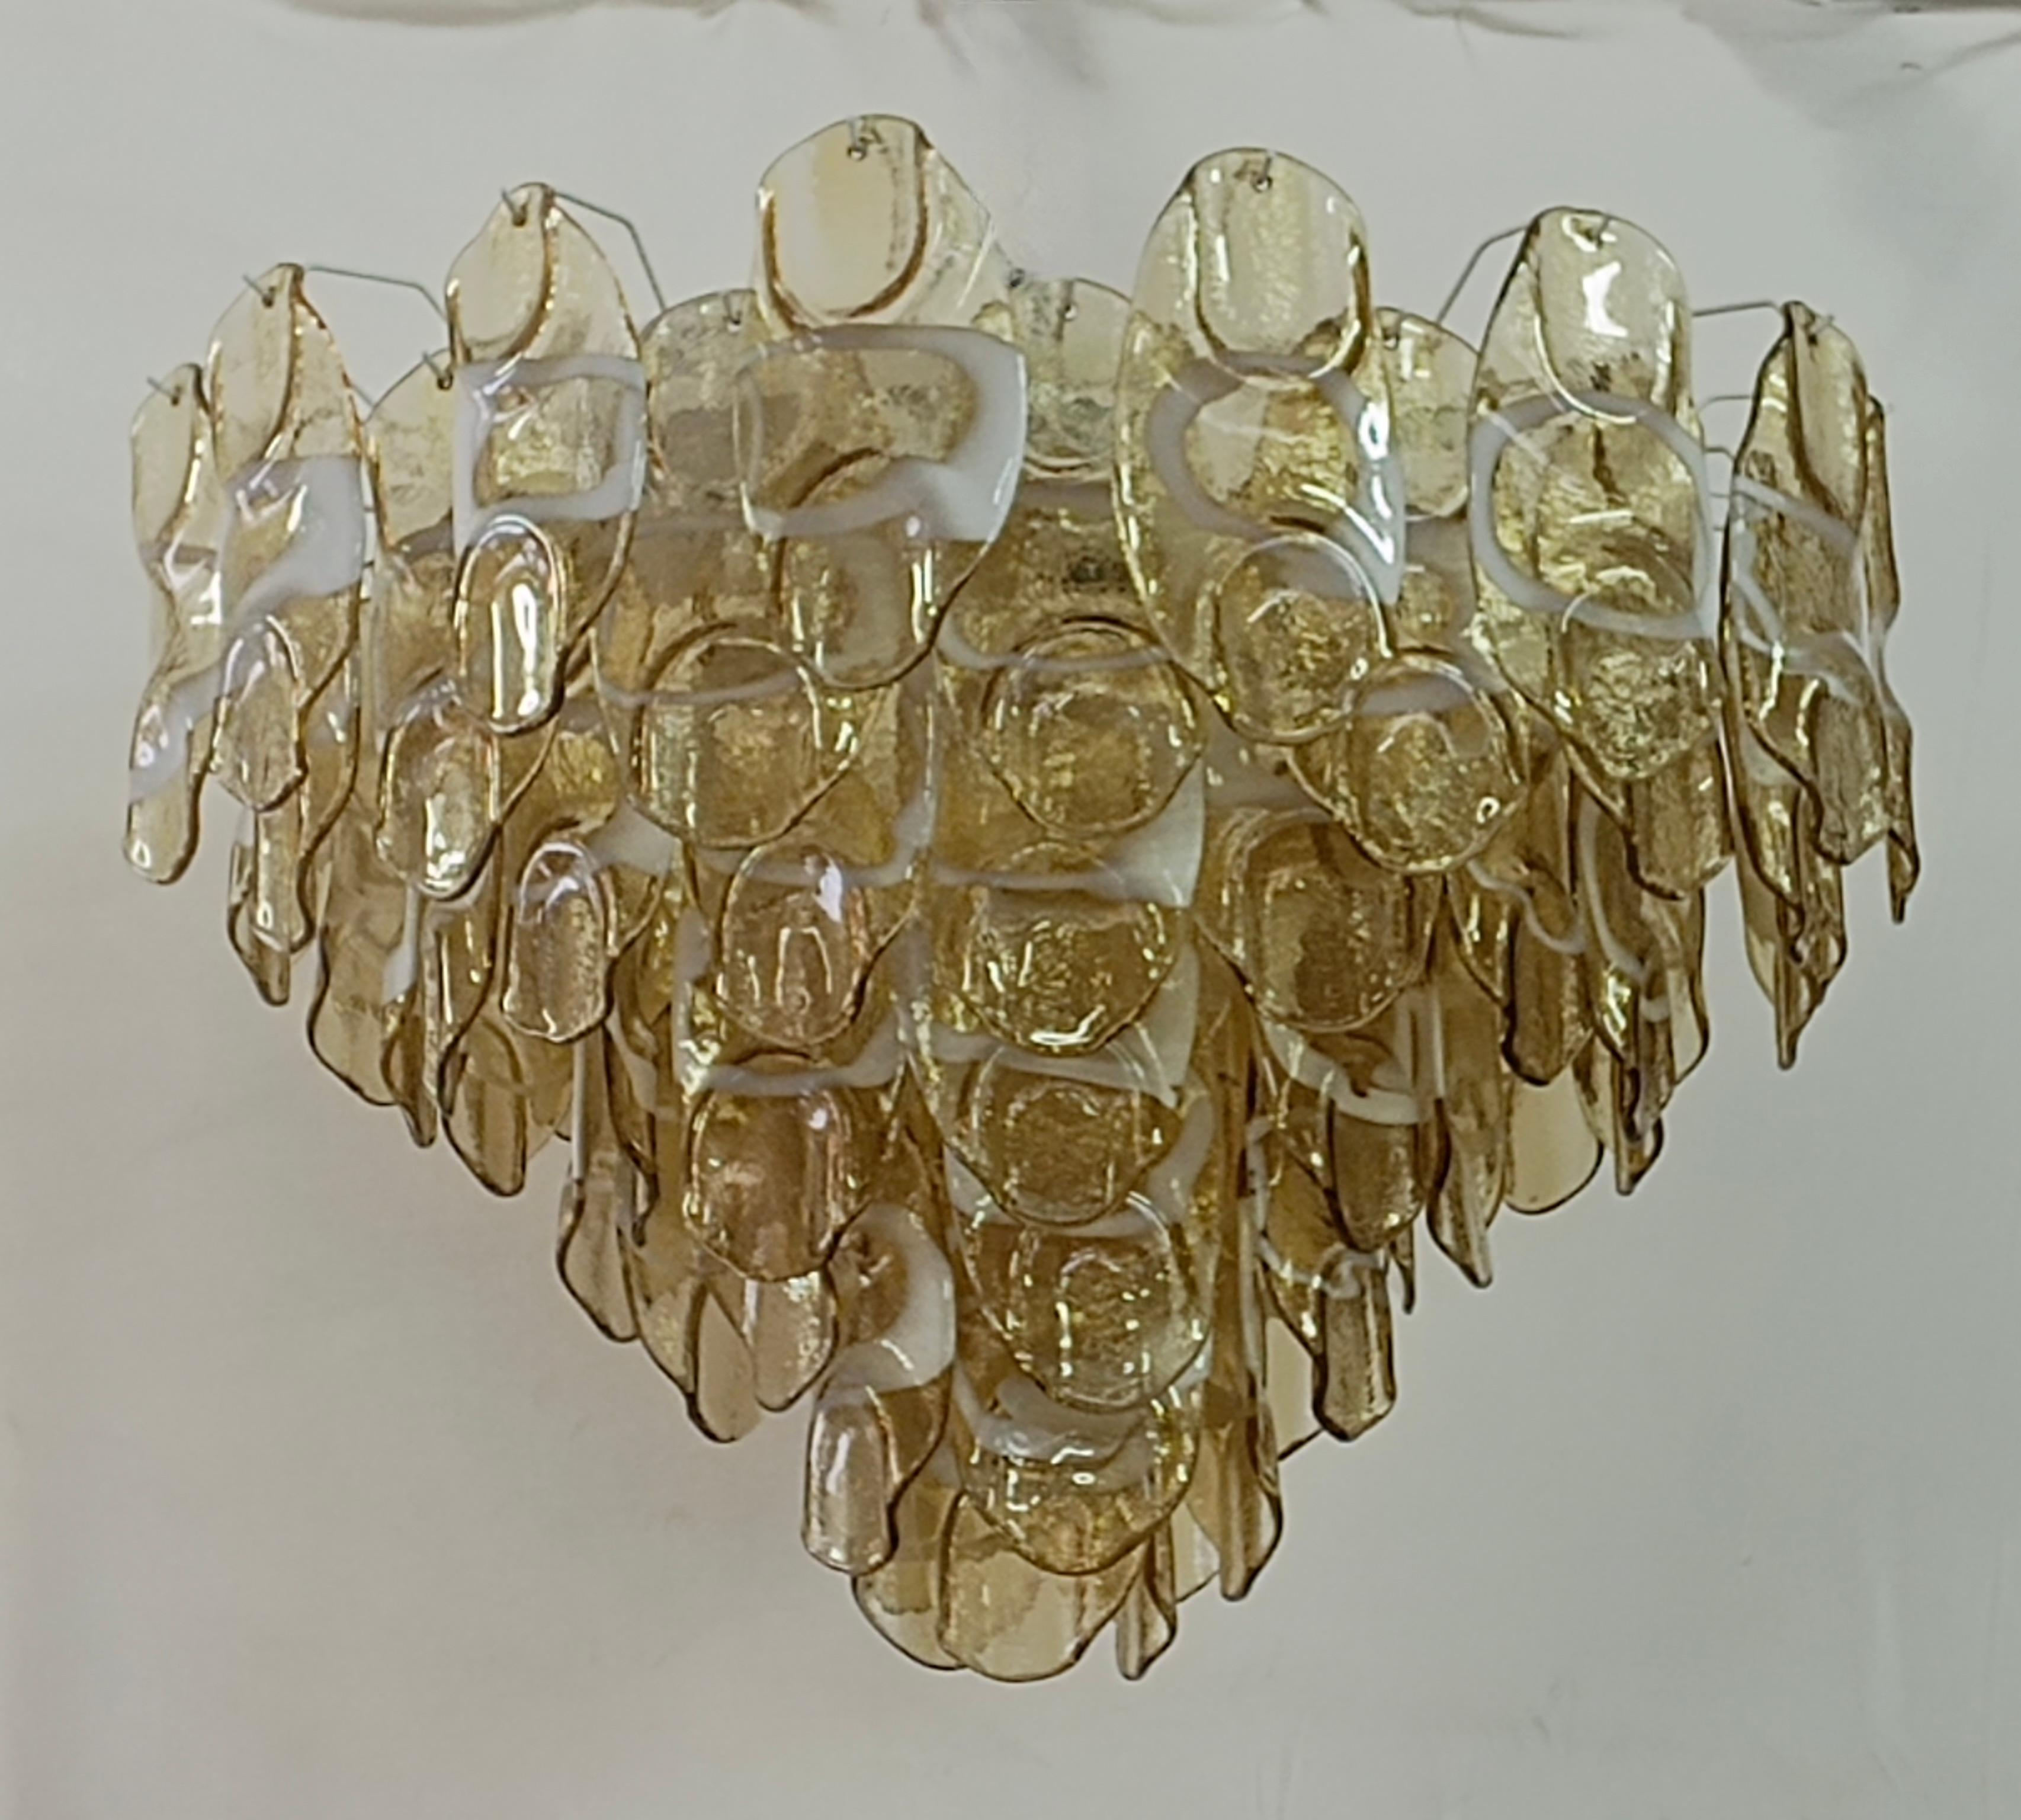 Fantastic Venetian amber and white color for a Cascade of Murano leaves. A striking color for this chandelier.

All in Murano art glass with amber leaves placed all around. The color of this very Classic Murano chandelier is very light amber with an